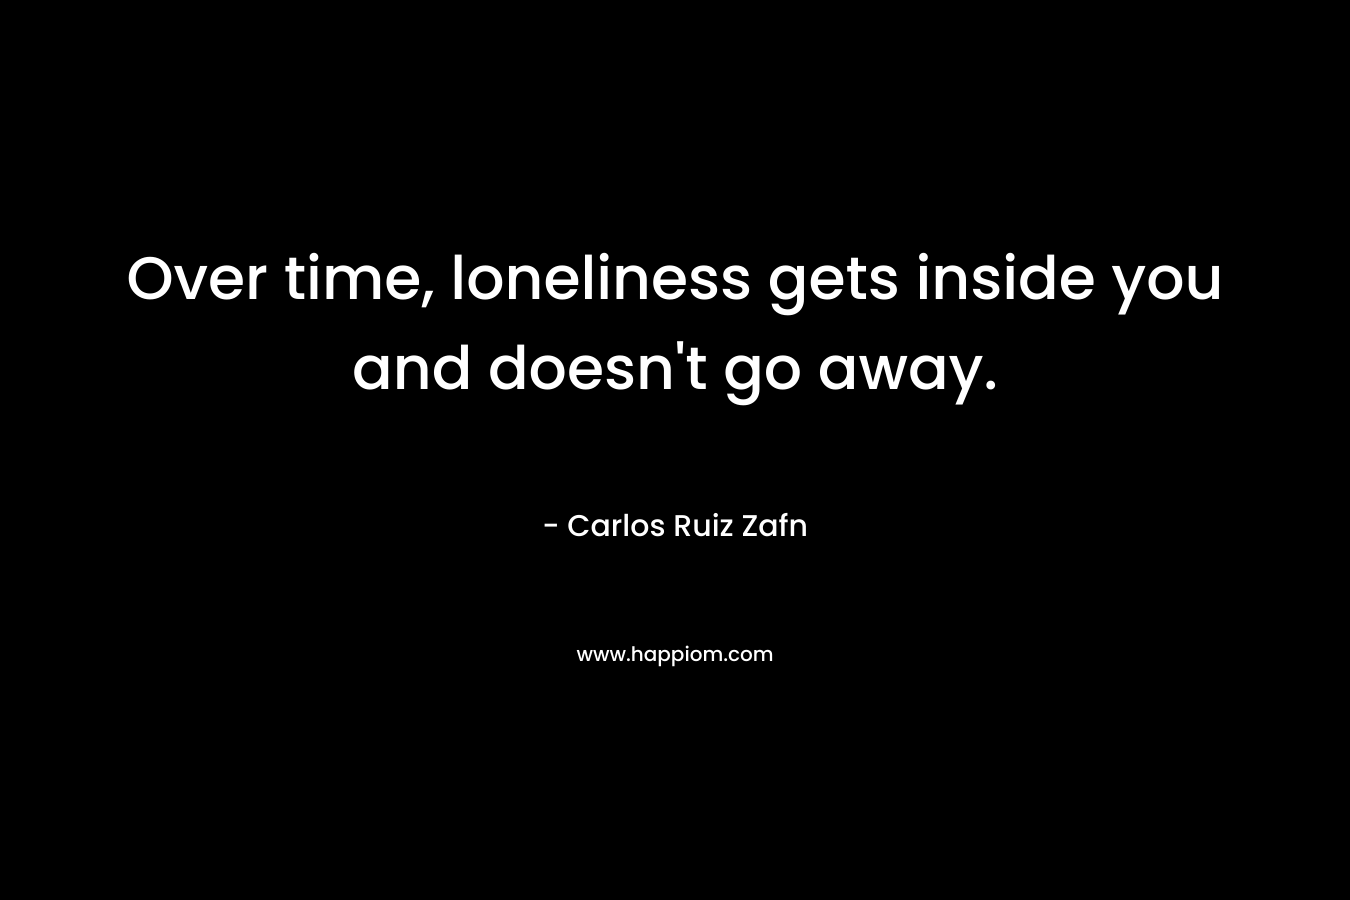 Over time, loneliness gets inside you and doesn't go away.